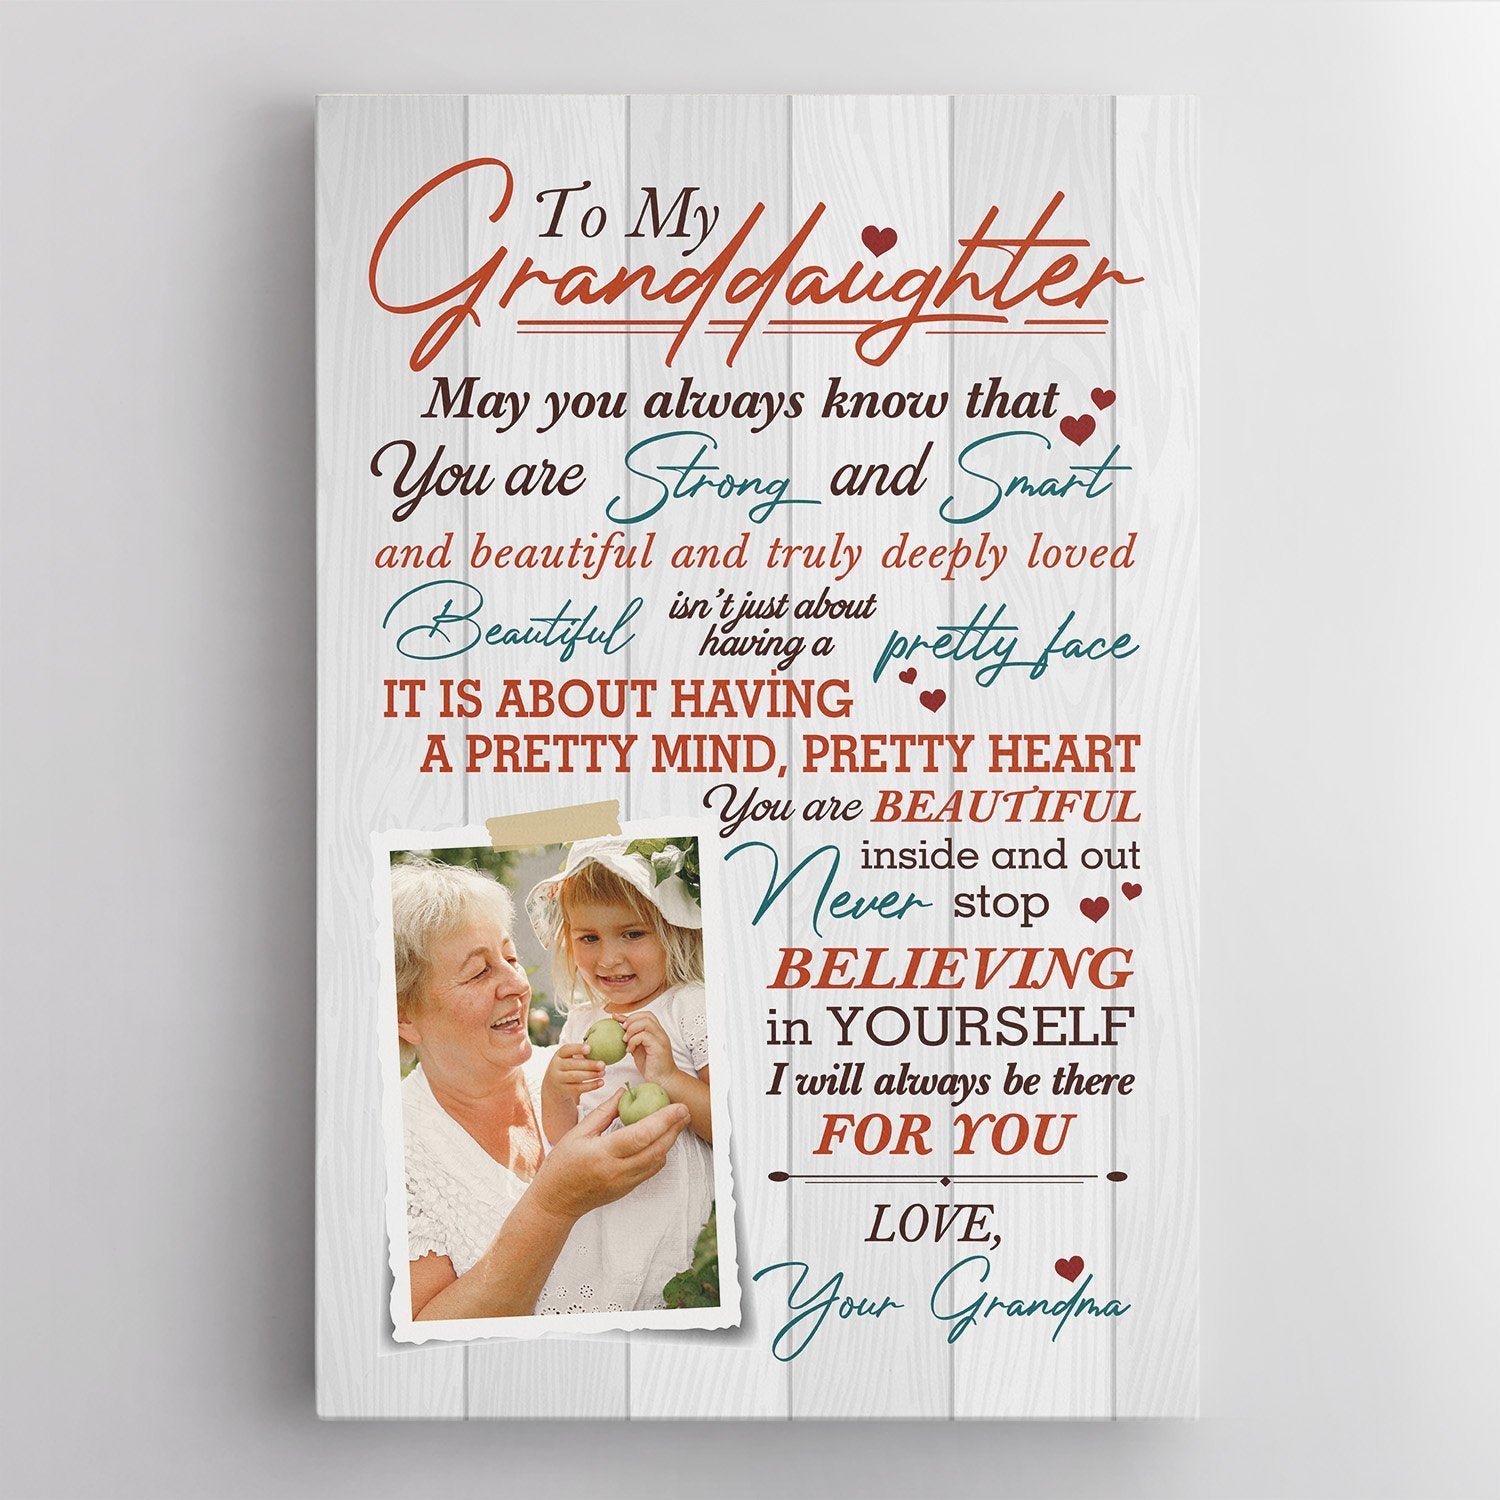 To My Granddaughter, Believing In Yourself I Will Always Be There For You, Custom Photo, Canvas Art Print